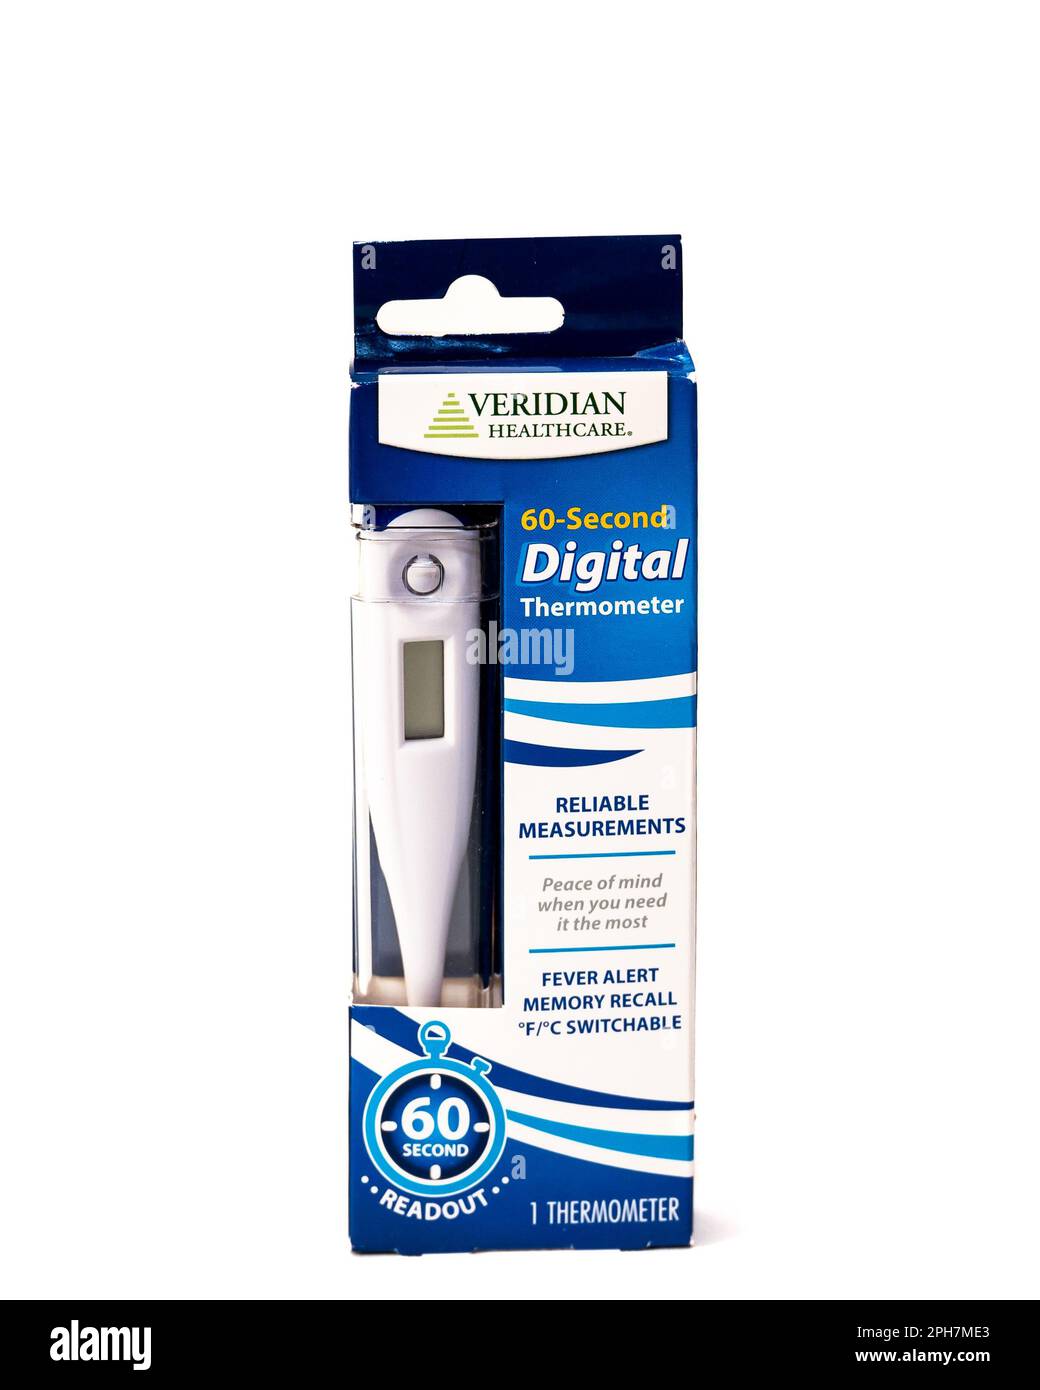 https://c8.alamy.com/comp/2PH7ME3/a-package-containing-a-veridian-healthcare-60-second-digital-thermometer-with-fever-alert-isolated-on-white-2PH7ME3.jpg